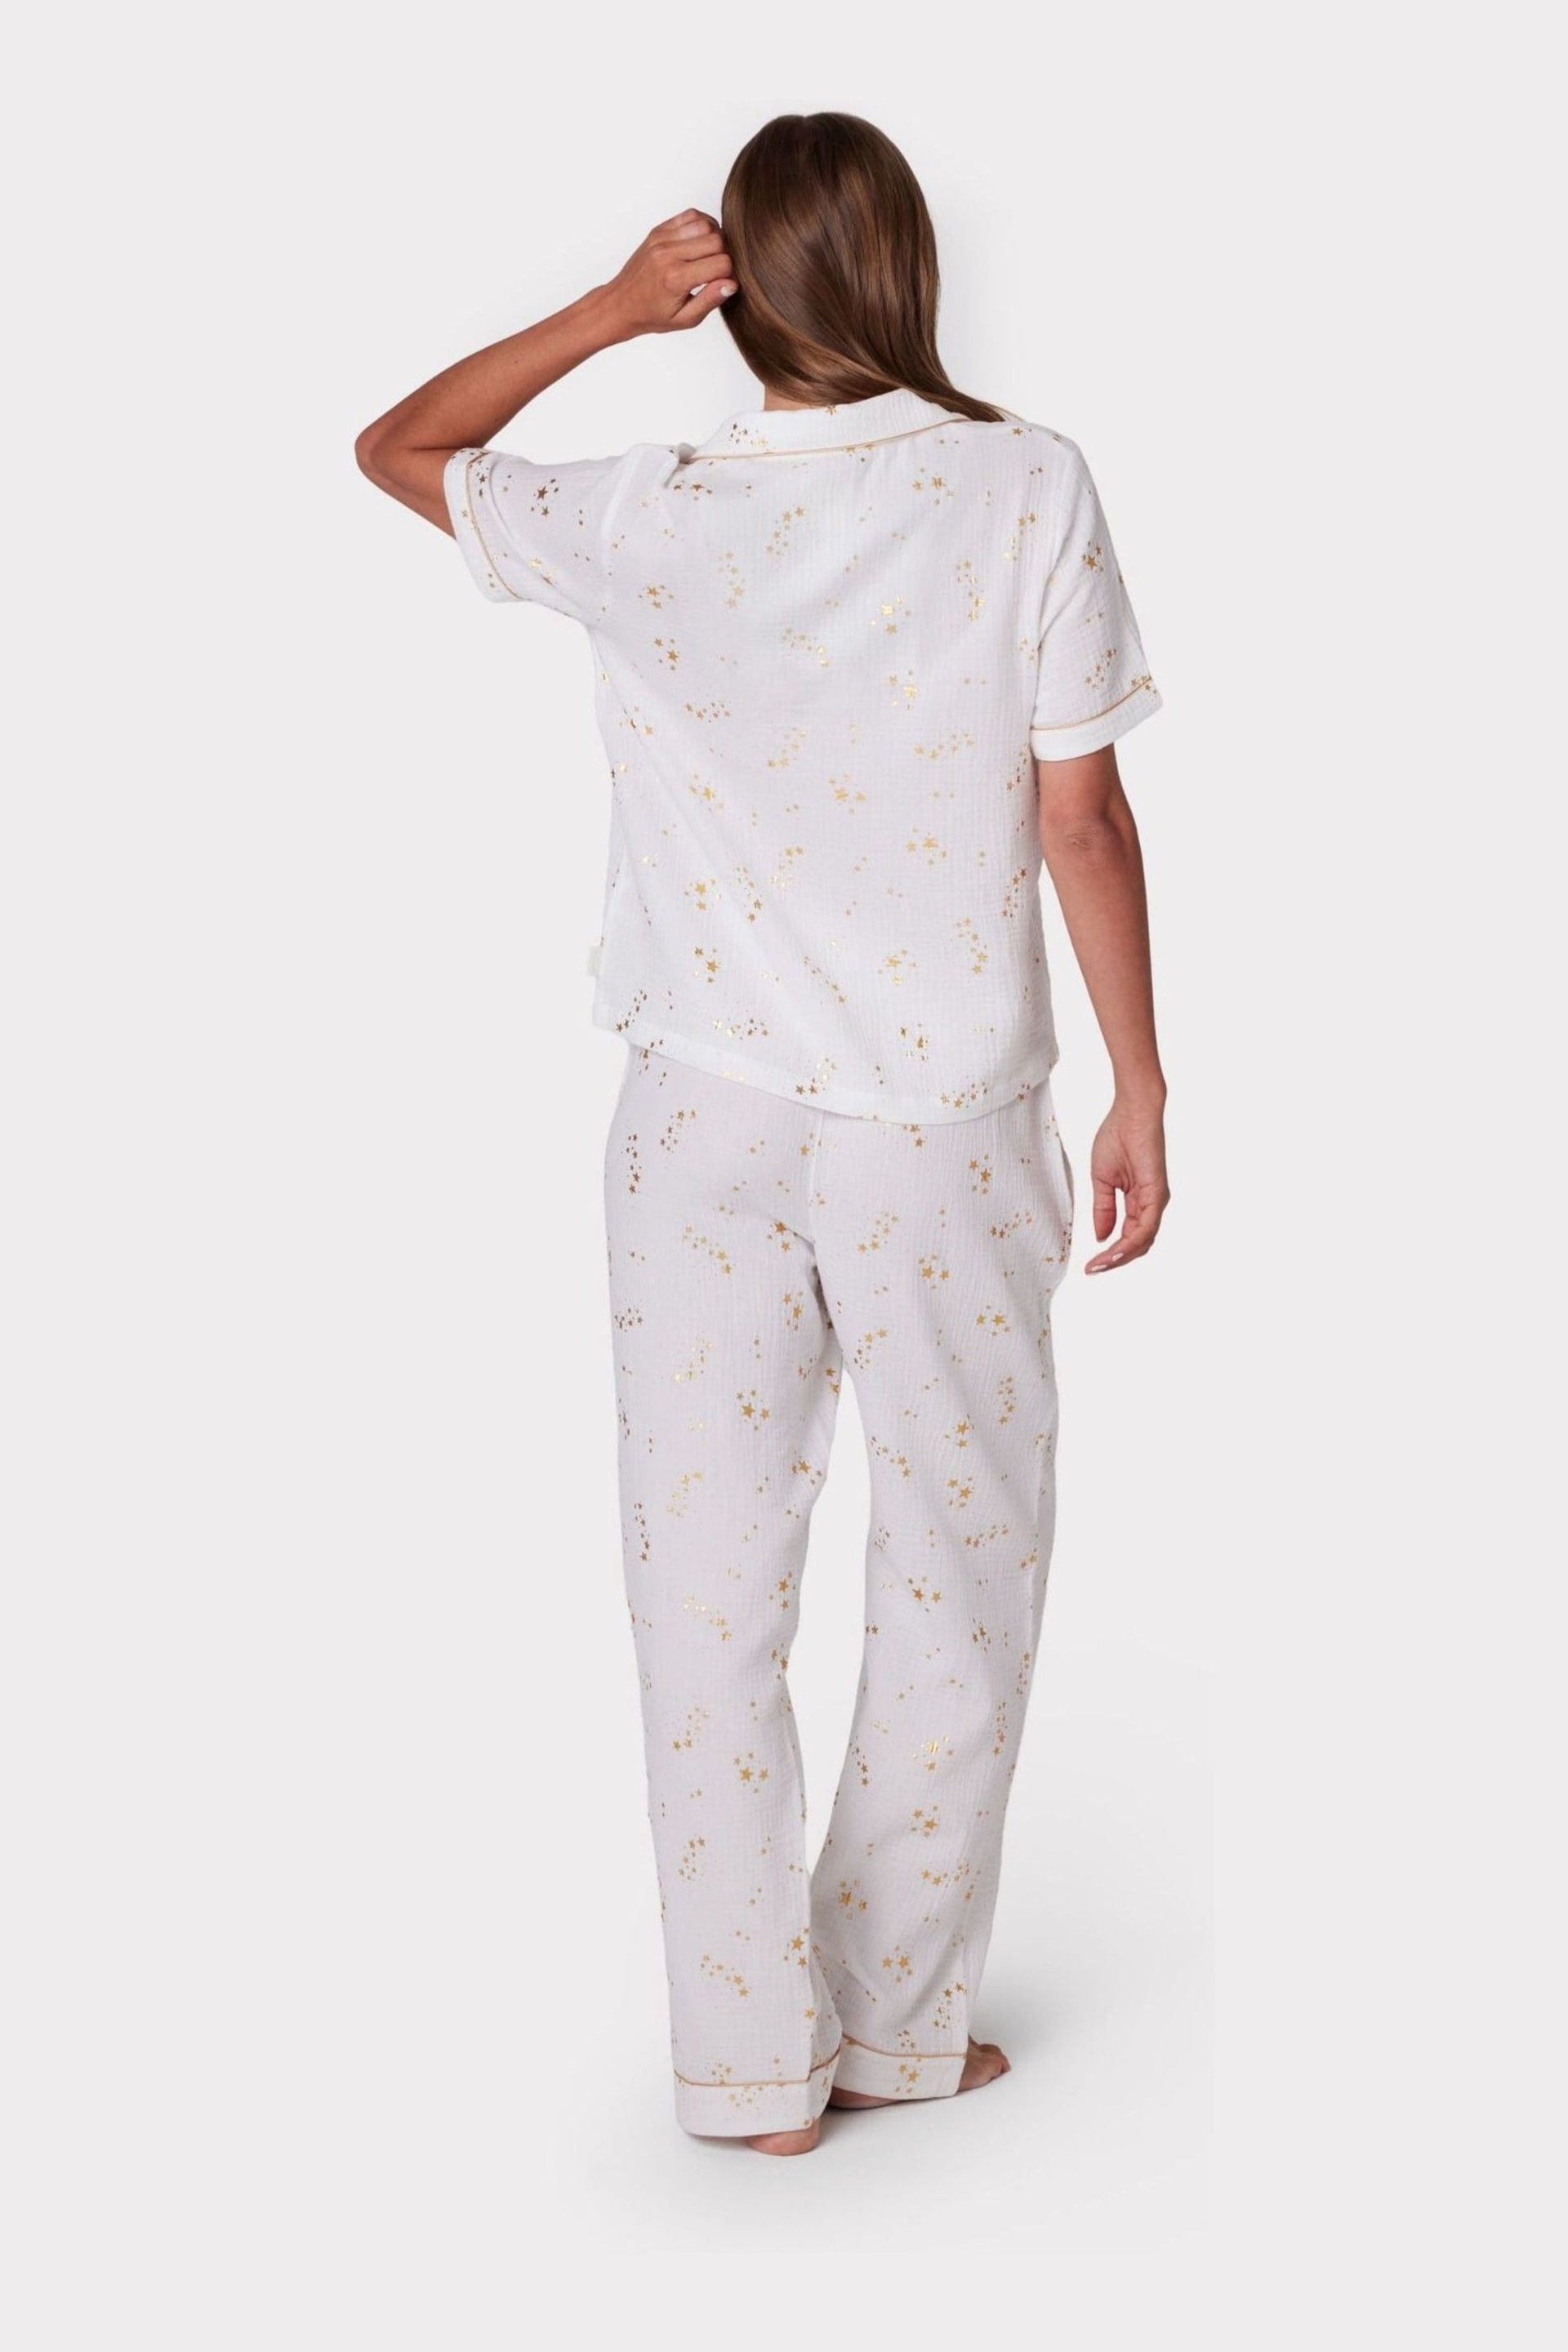 Chelsea Peers White Cotton Cheesecloth Foil Star Print Long Pyjama Set - Image 2 of 5